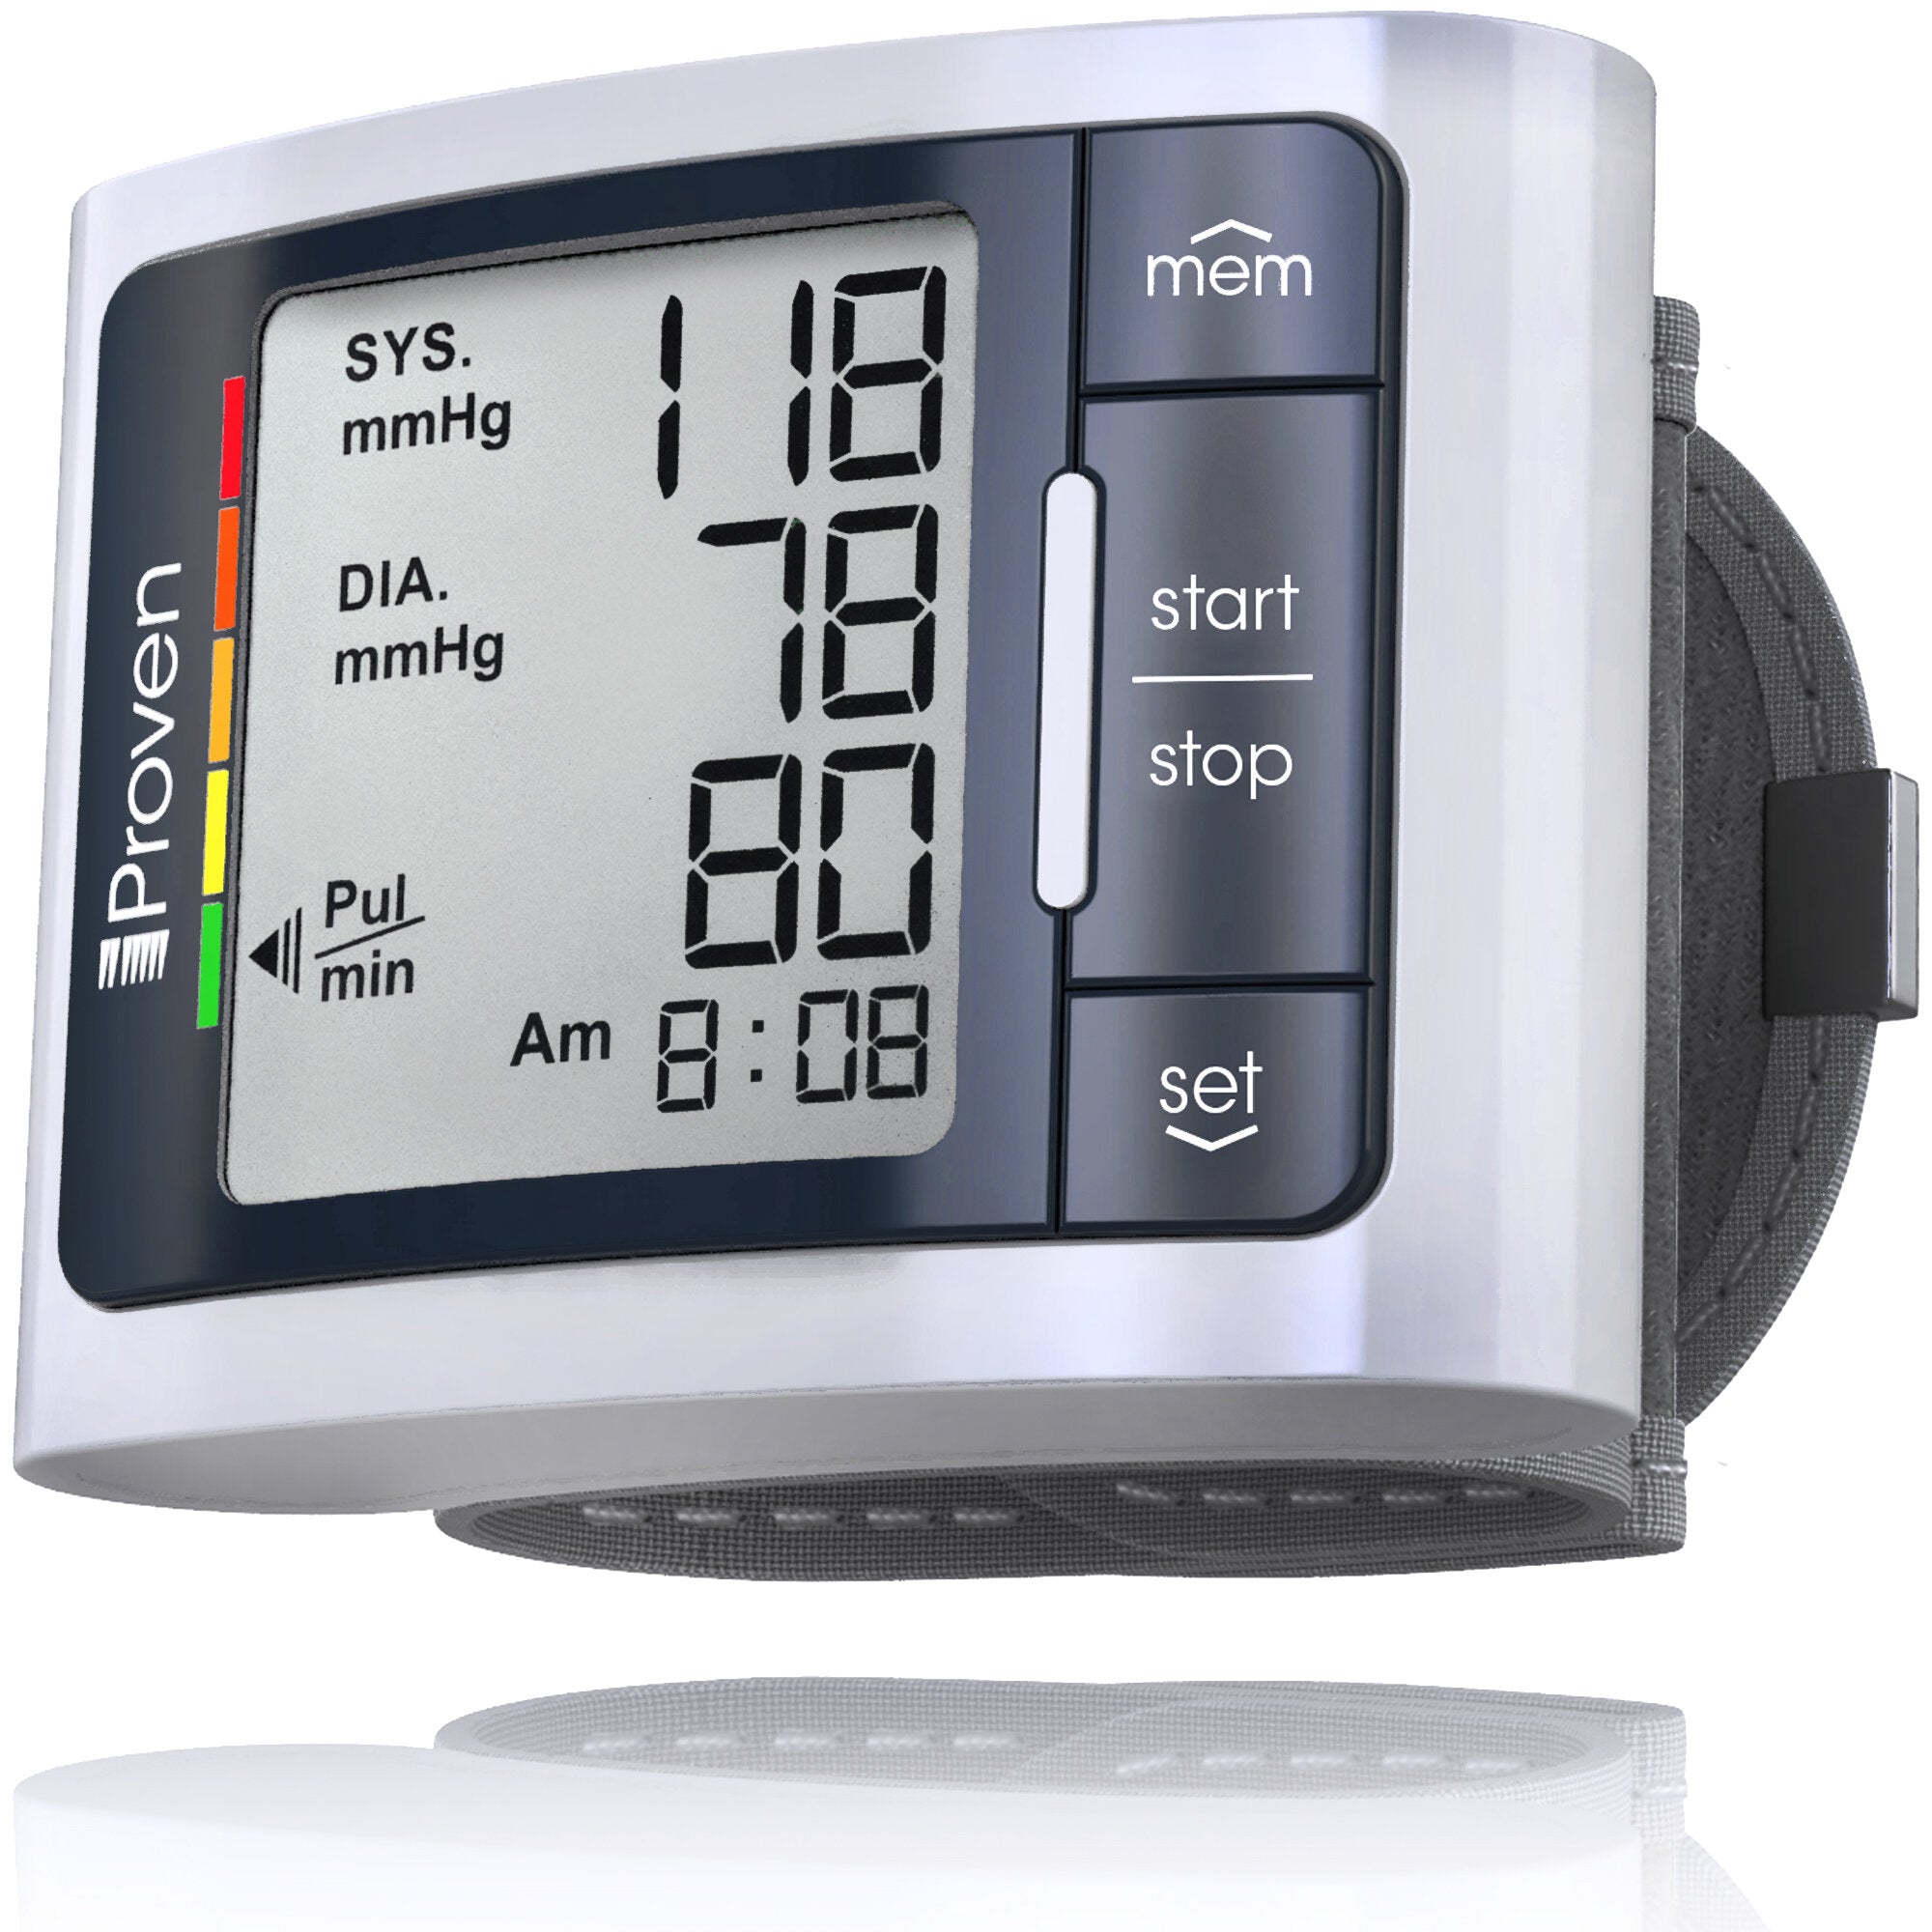 Digital Wrist Blood Pressure Monitor - Price Reduced for Clearance